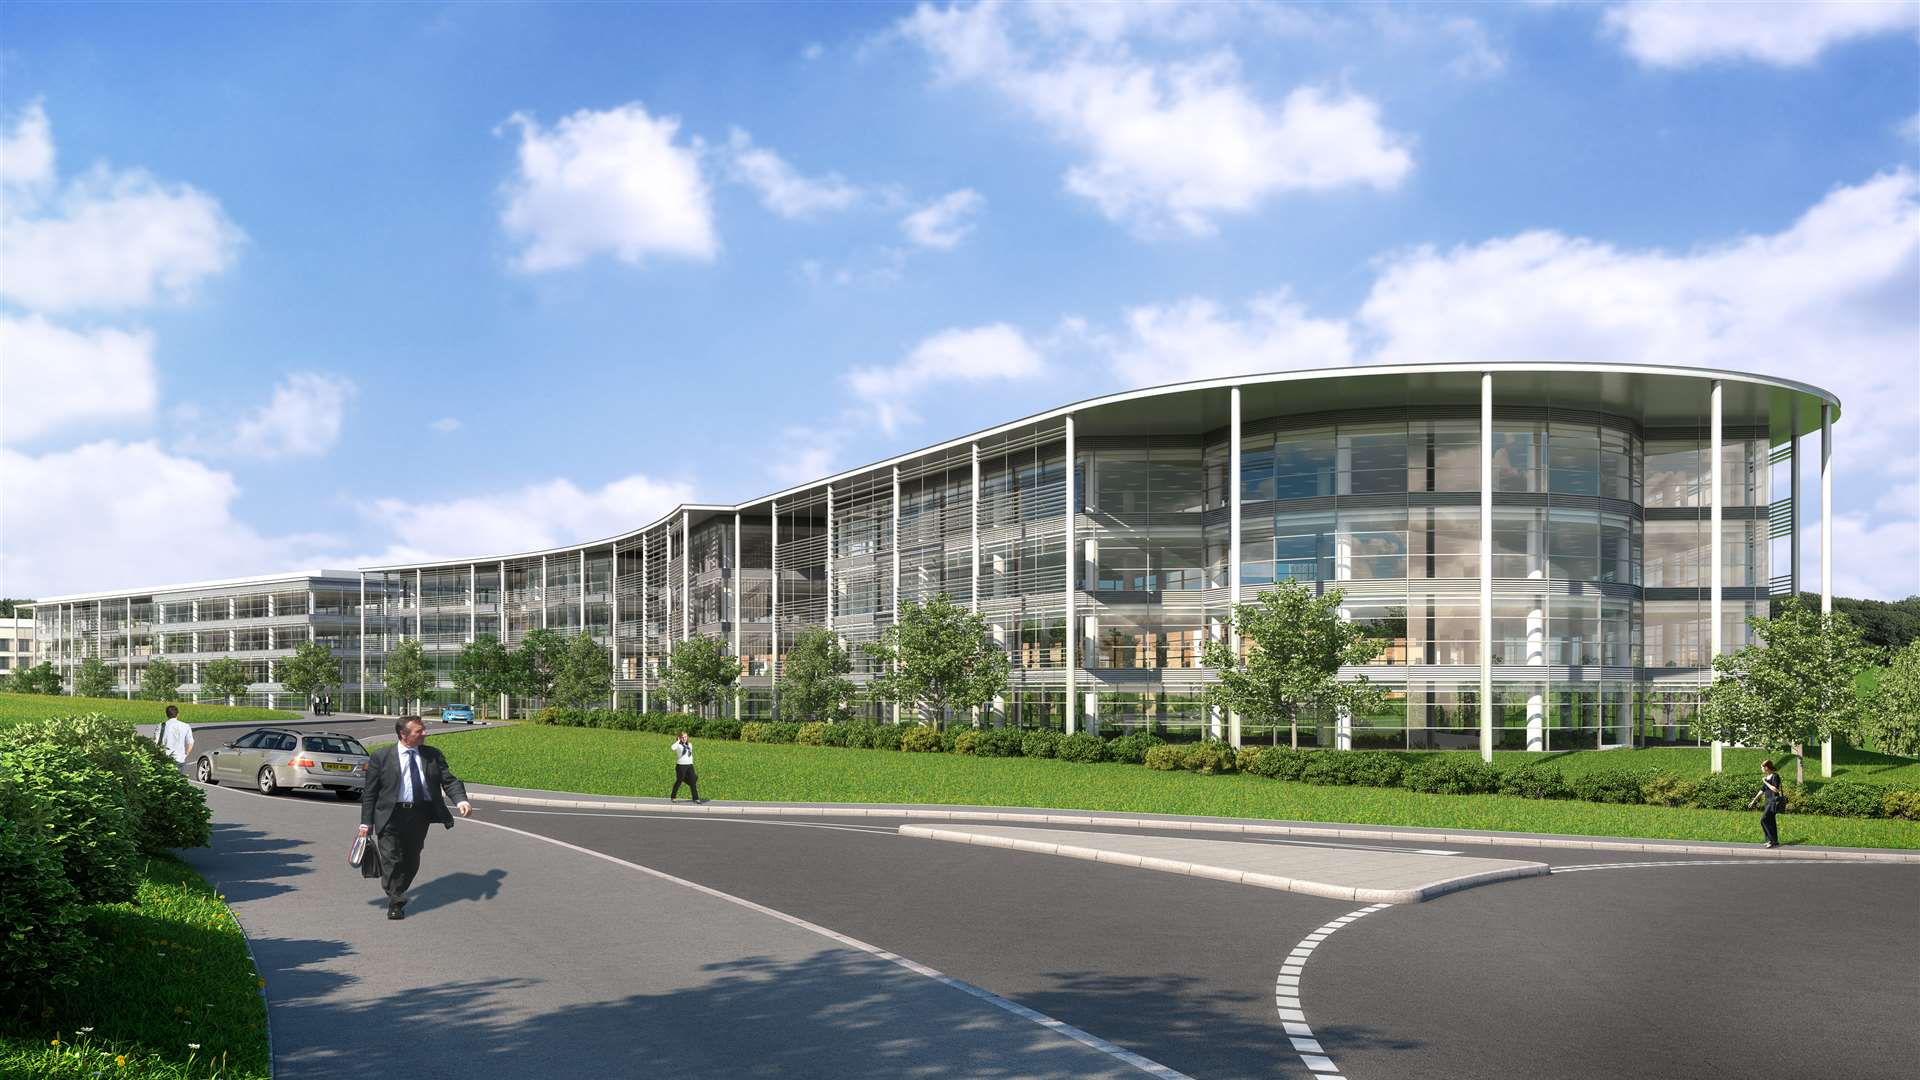 Artist's impression of the Kent Medical Campus